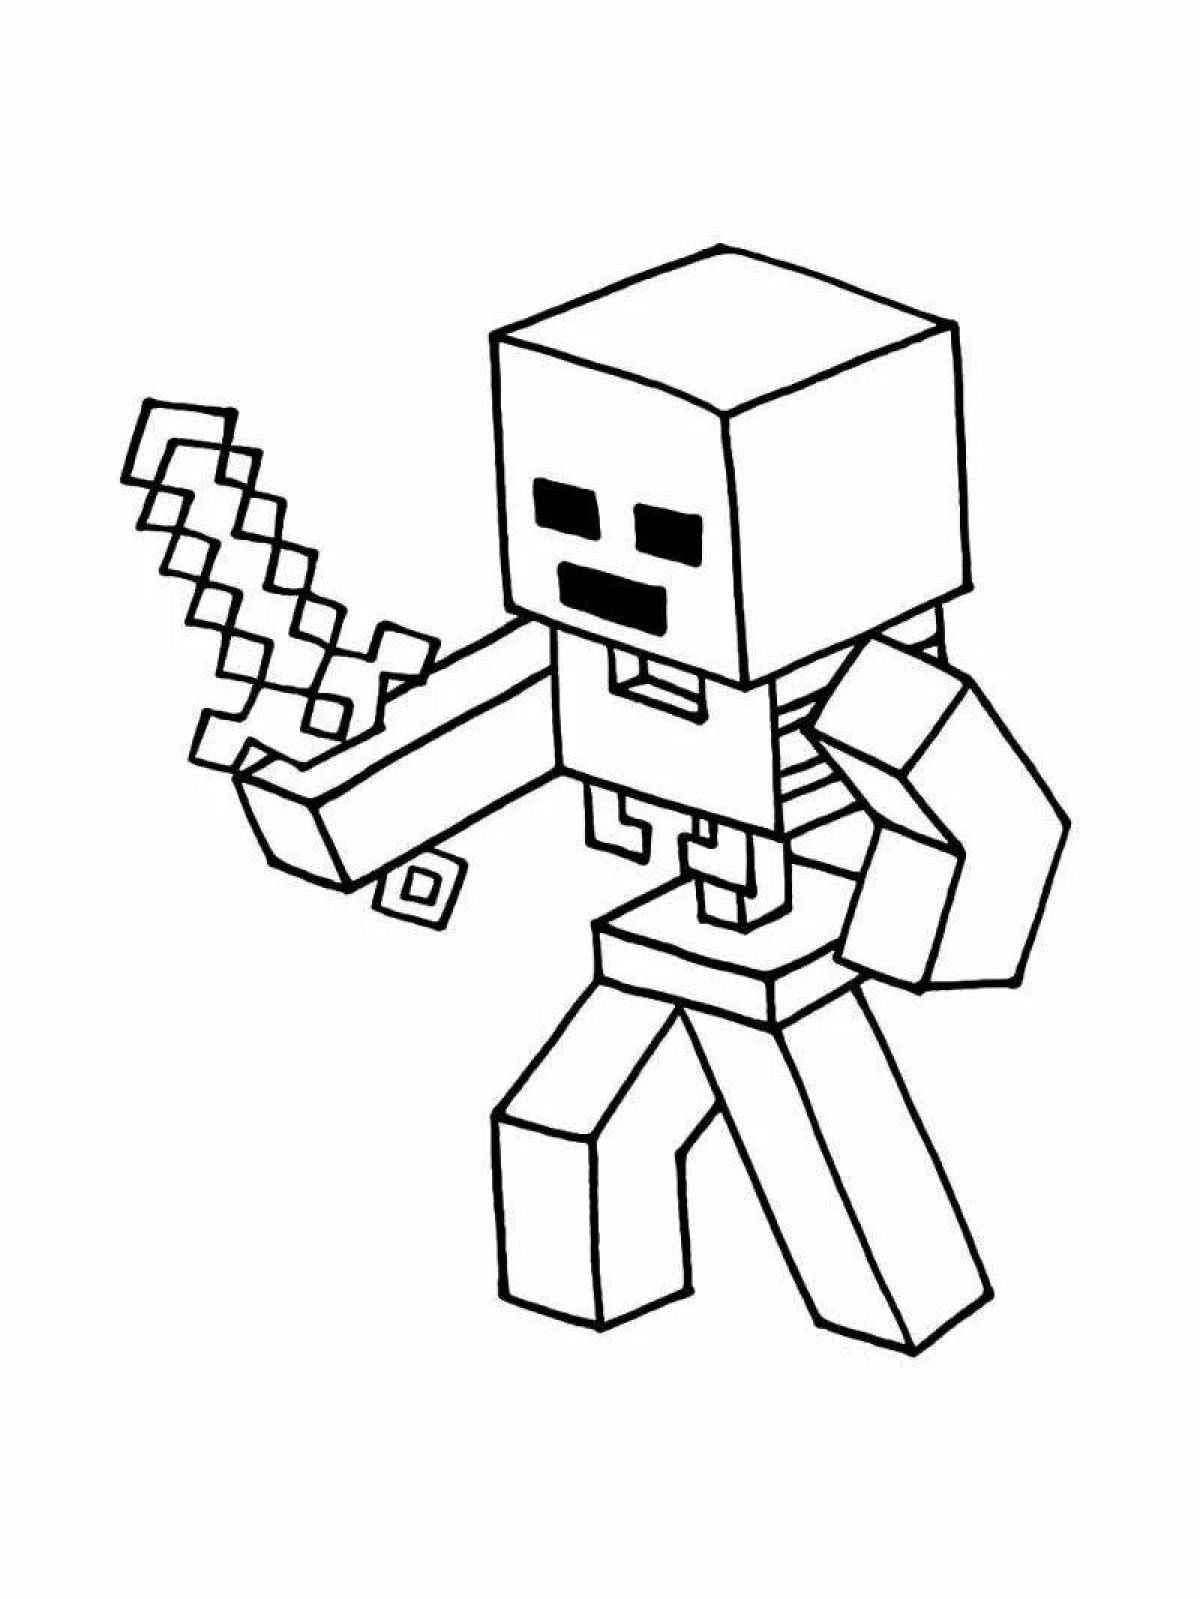 Colorful vizer minecraft coloring page